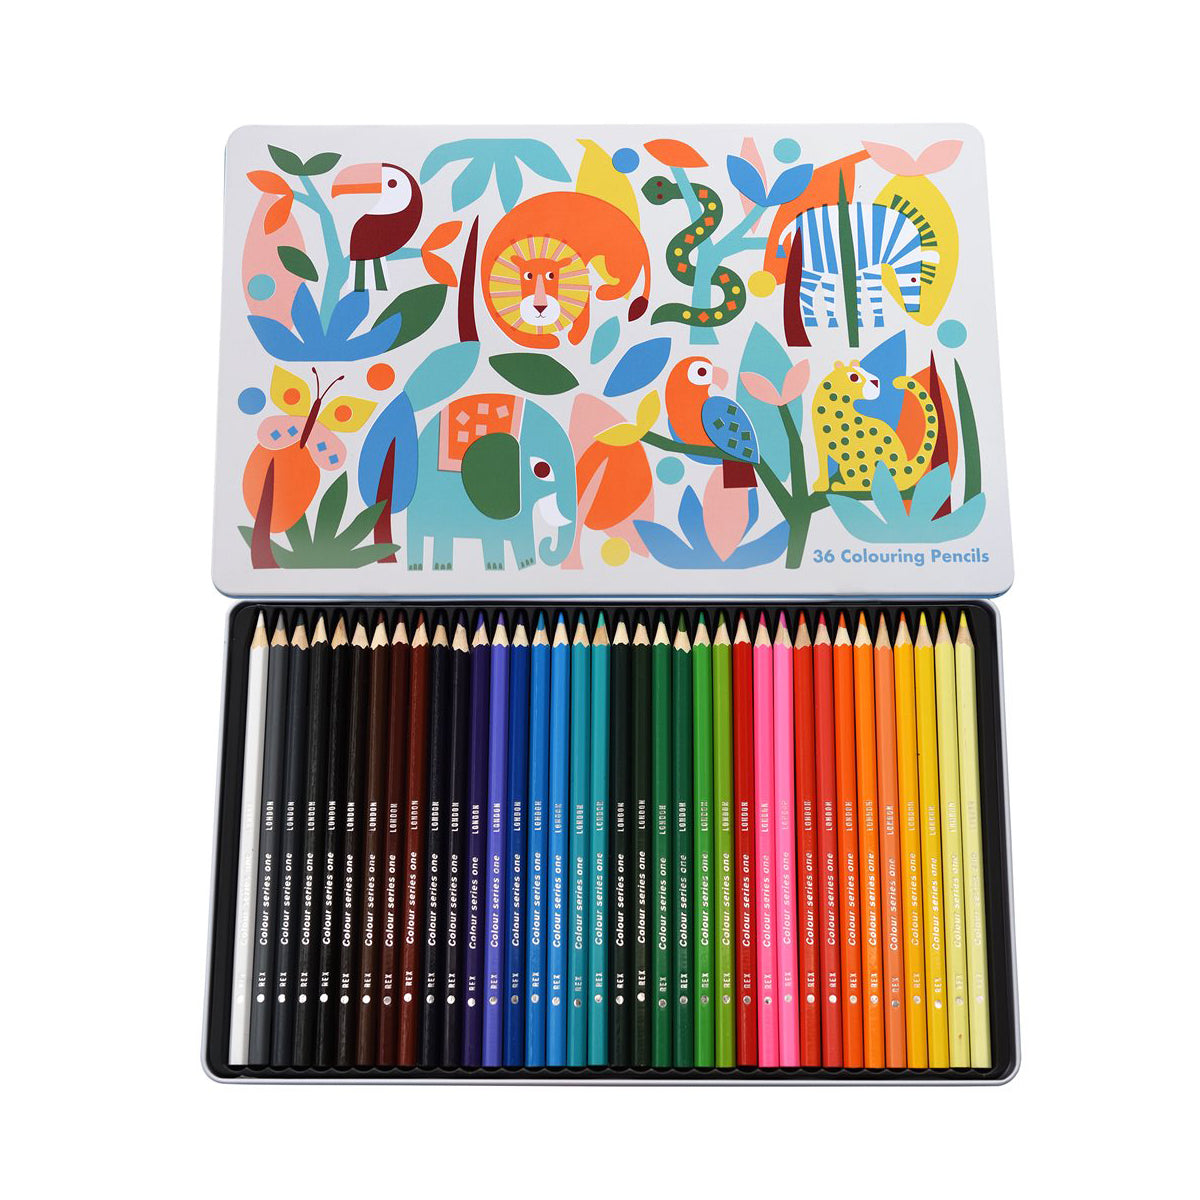 Image of Wild Wonders 36 Colouring Pencils Tin open